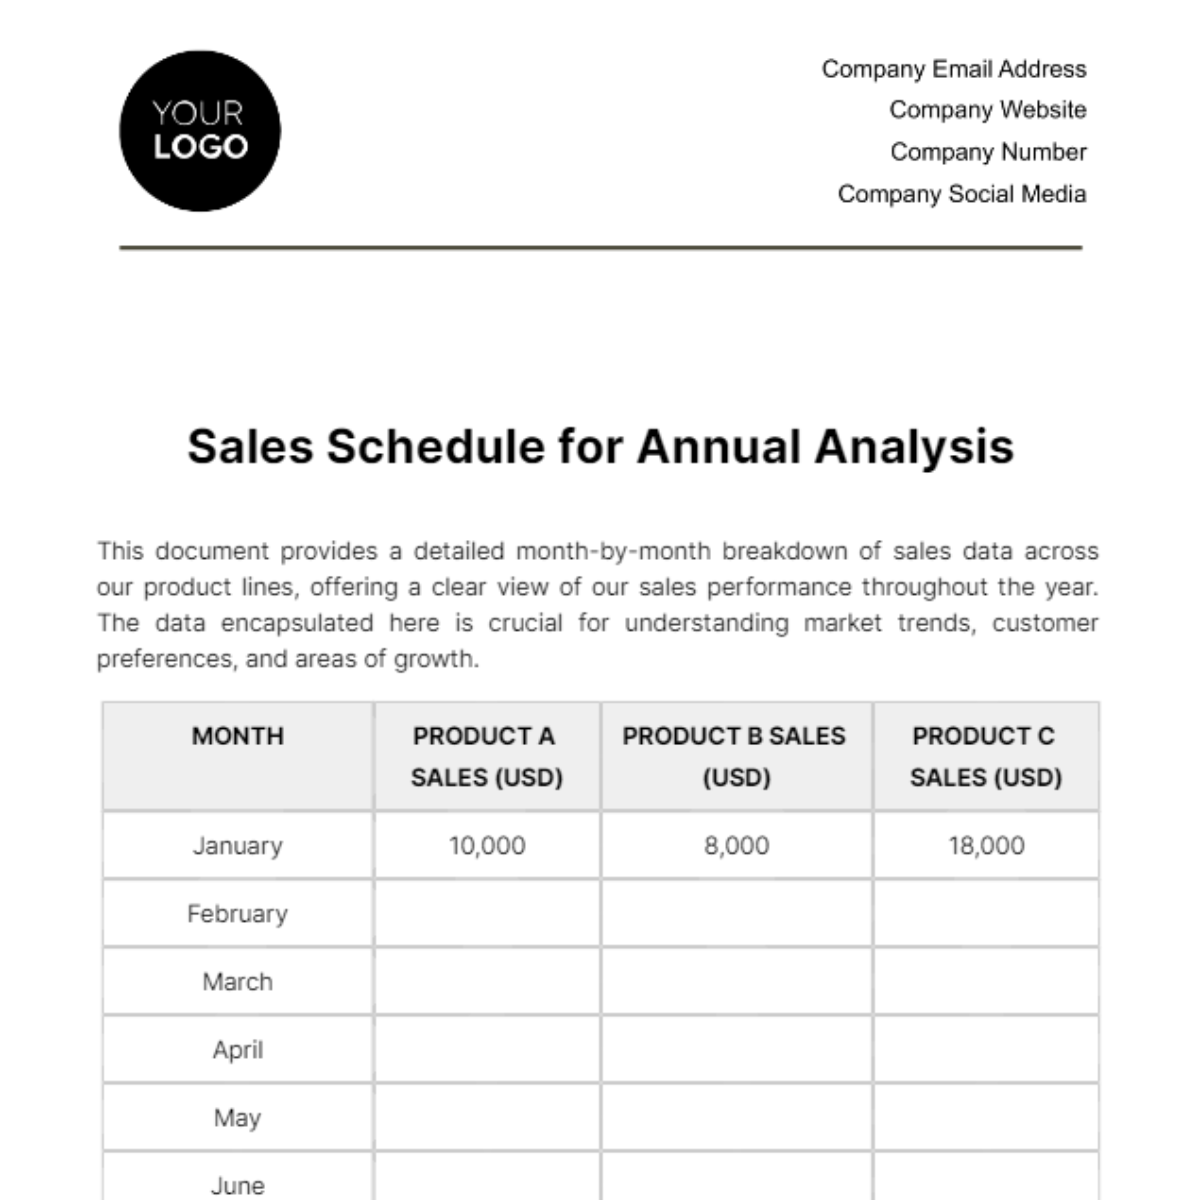 Sales Schedule for Annual Analysis Template